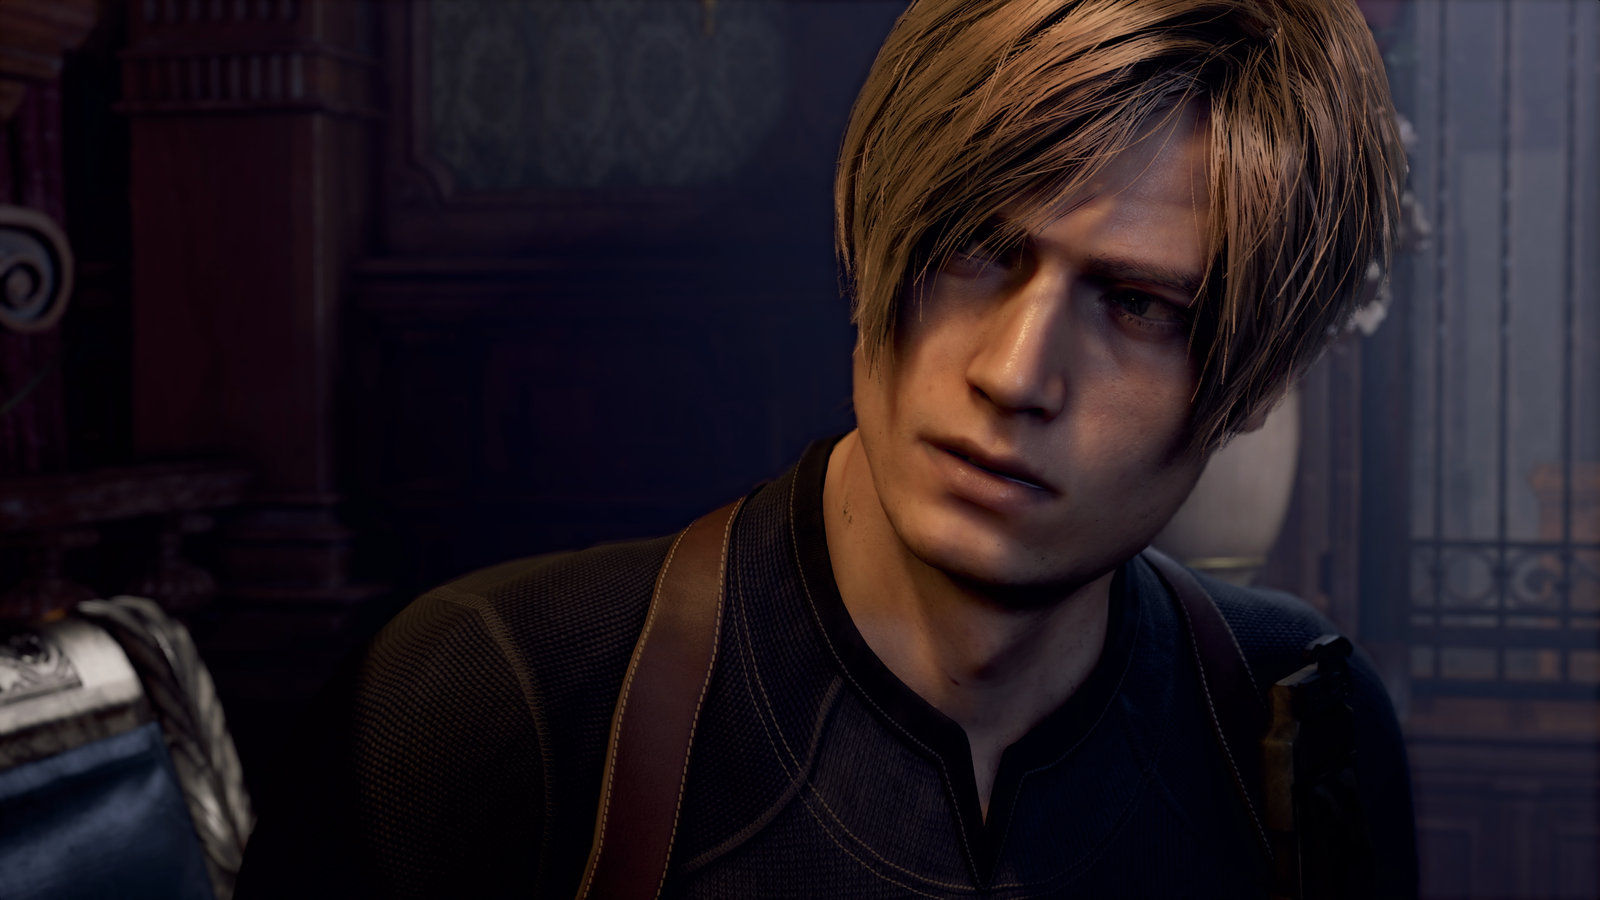 Resident Evil 4 Remake Reveals Deluxe and Collector's Edition Content